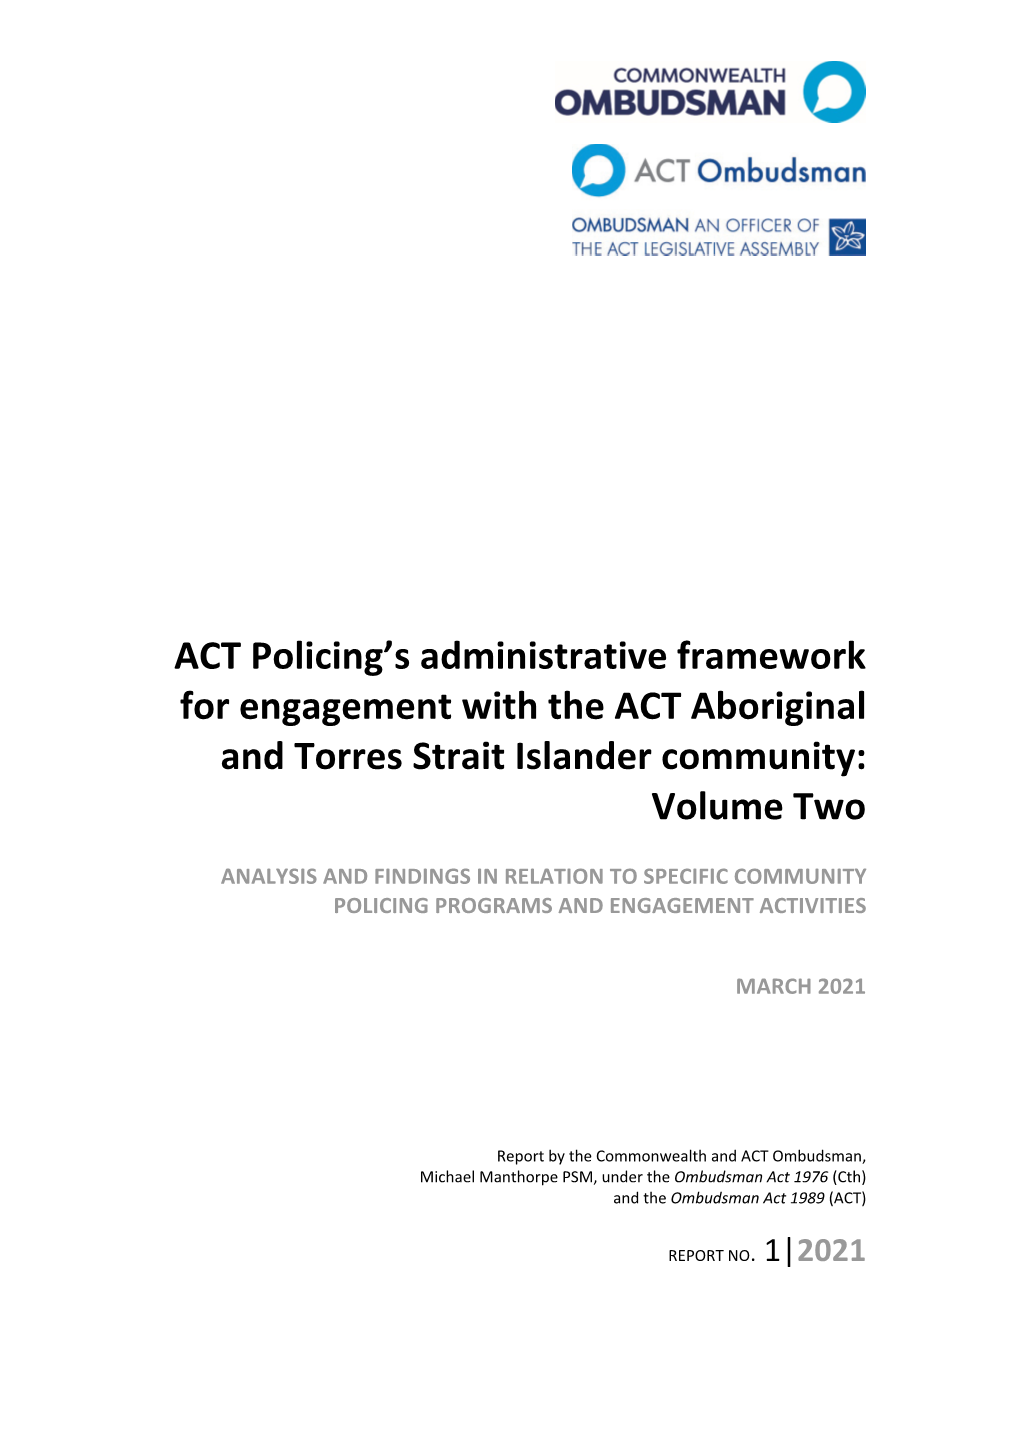 ACT Policing's Administrative Framework for Engagement with The